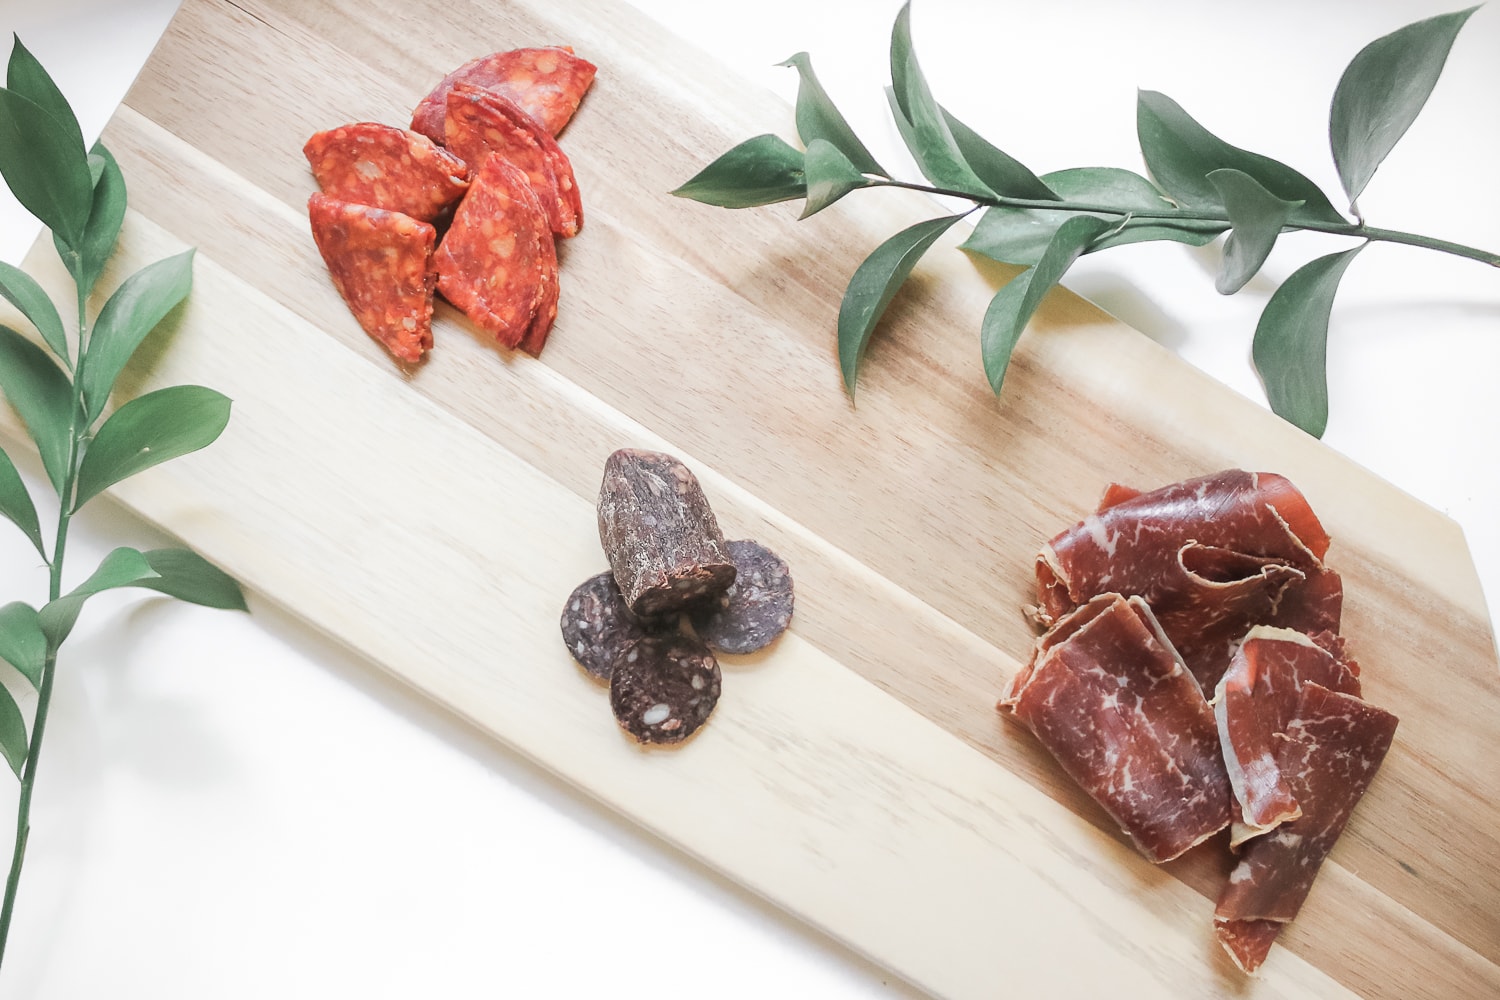 Southern blogger Stephanie Ziajka shares the best meats for charcuterie boards on Diary of a Debutante